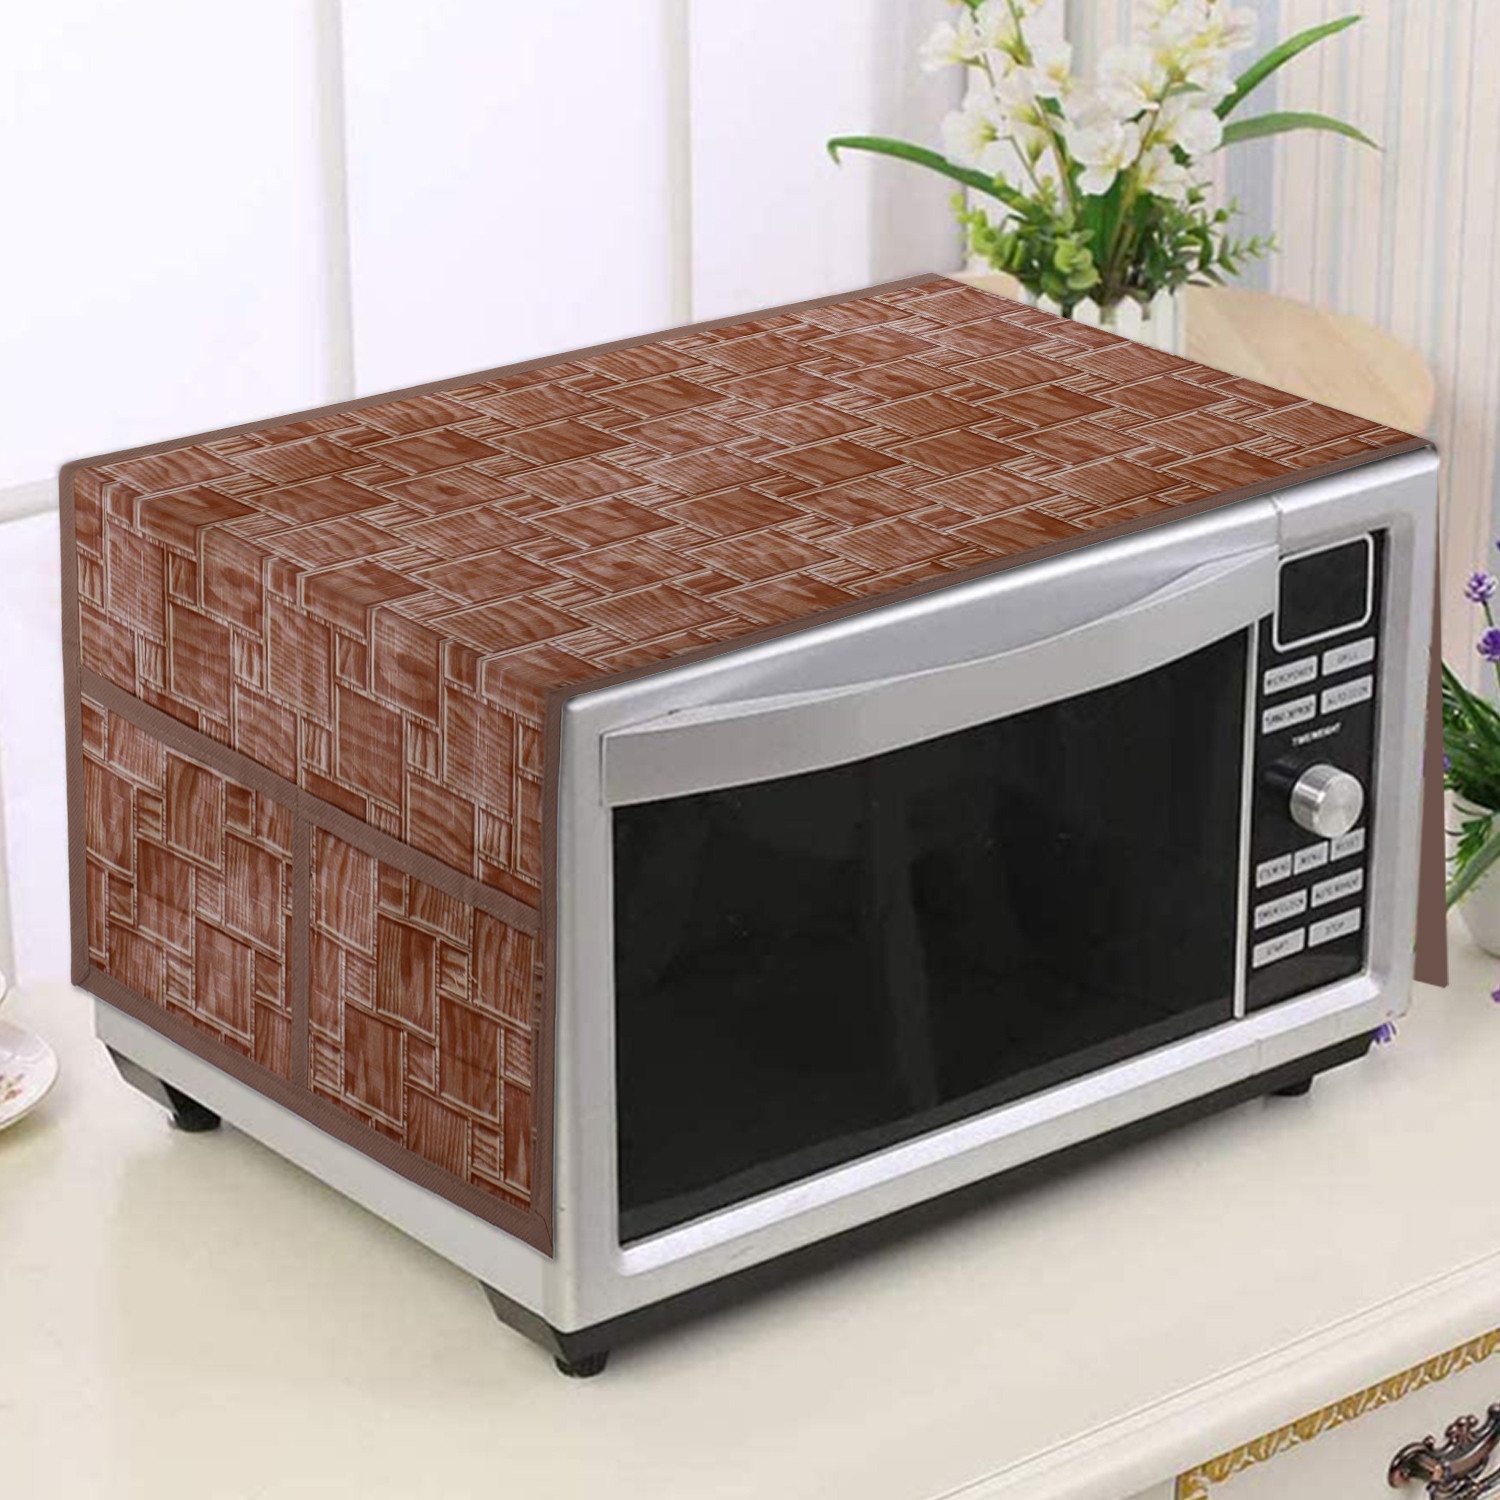 Kuber Industries Wooden Check Printed PVC Decorative Microwave Oven Top Cover With 4 Utility Pockets (Brown)